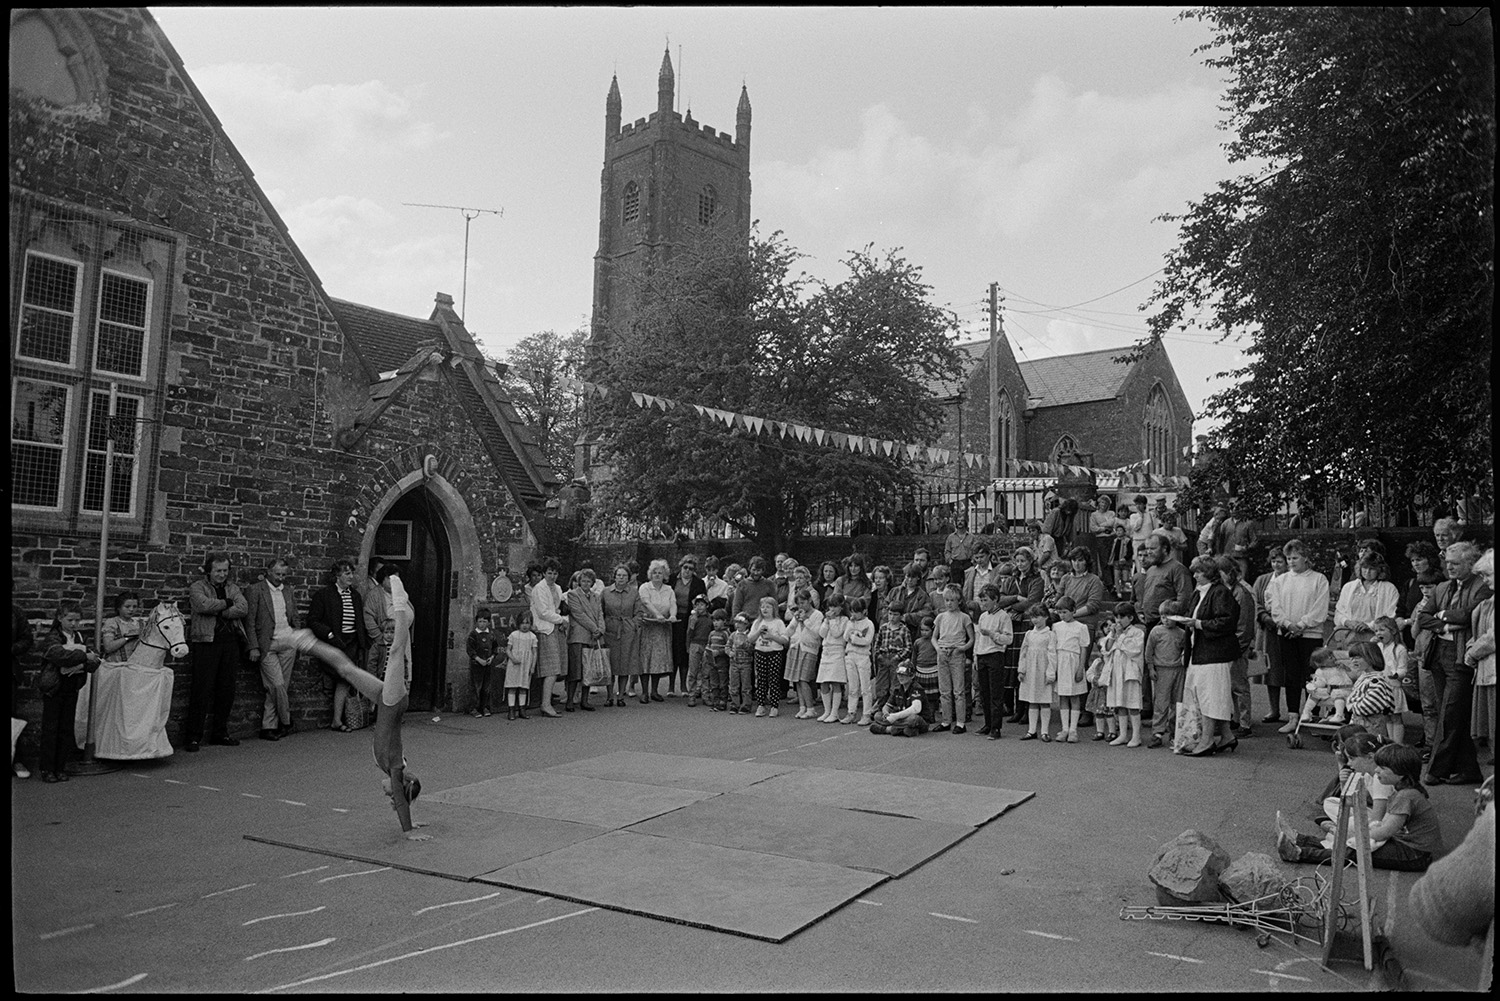 A crowd watching a girl perform a gymnastic display in the playground at Chulmleigh Primary School fete. The playground is decorated with bunting and Chulmleigh Church can be seen in the background.